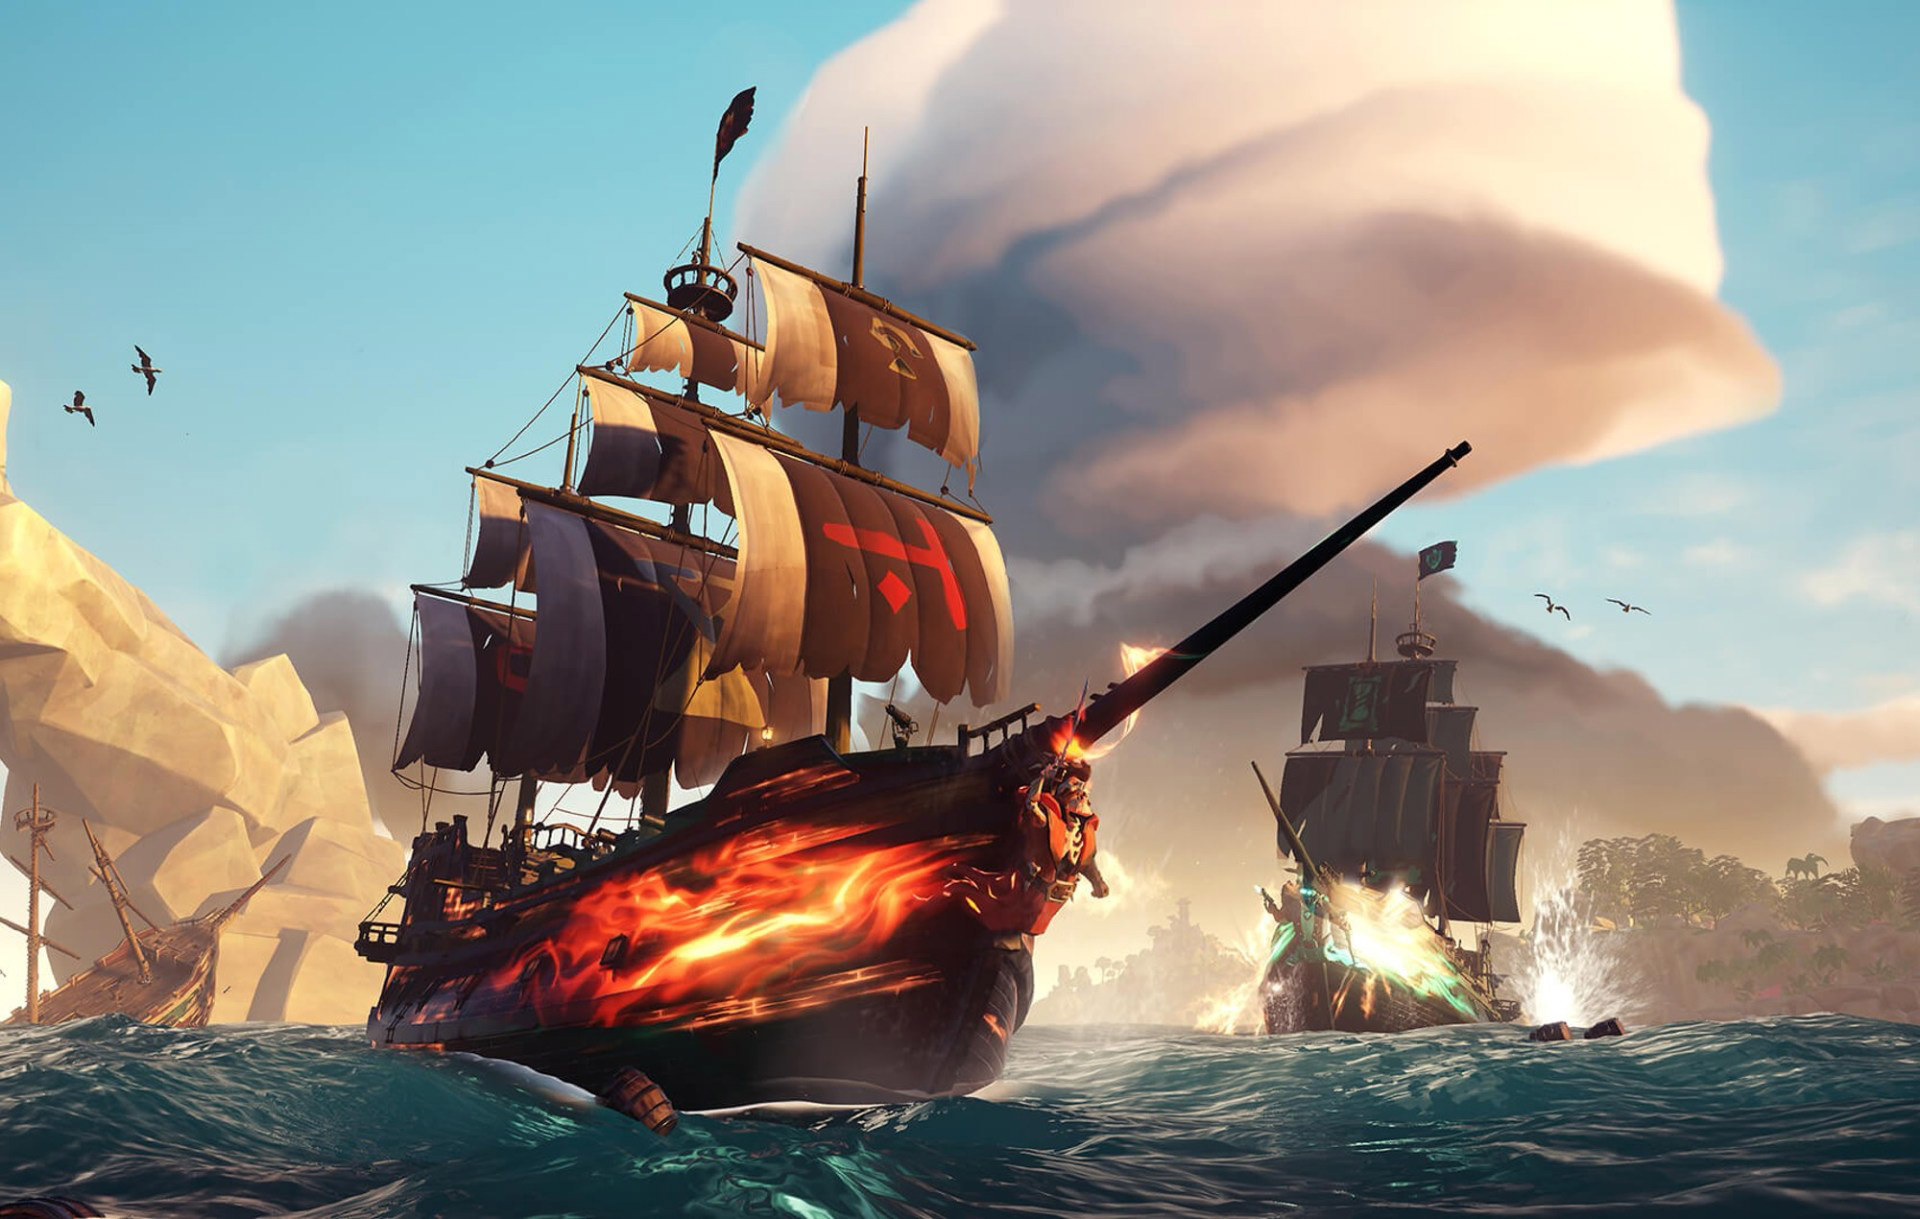 Xbox's Sea Of Thieves is the most preordered game on PS5 right now